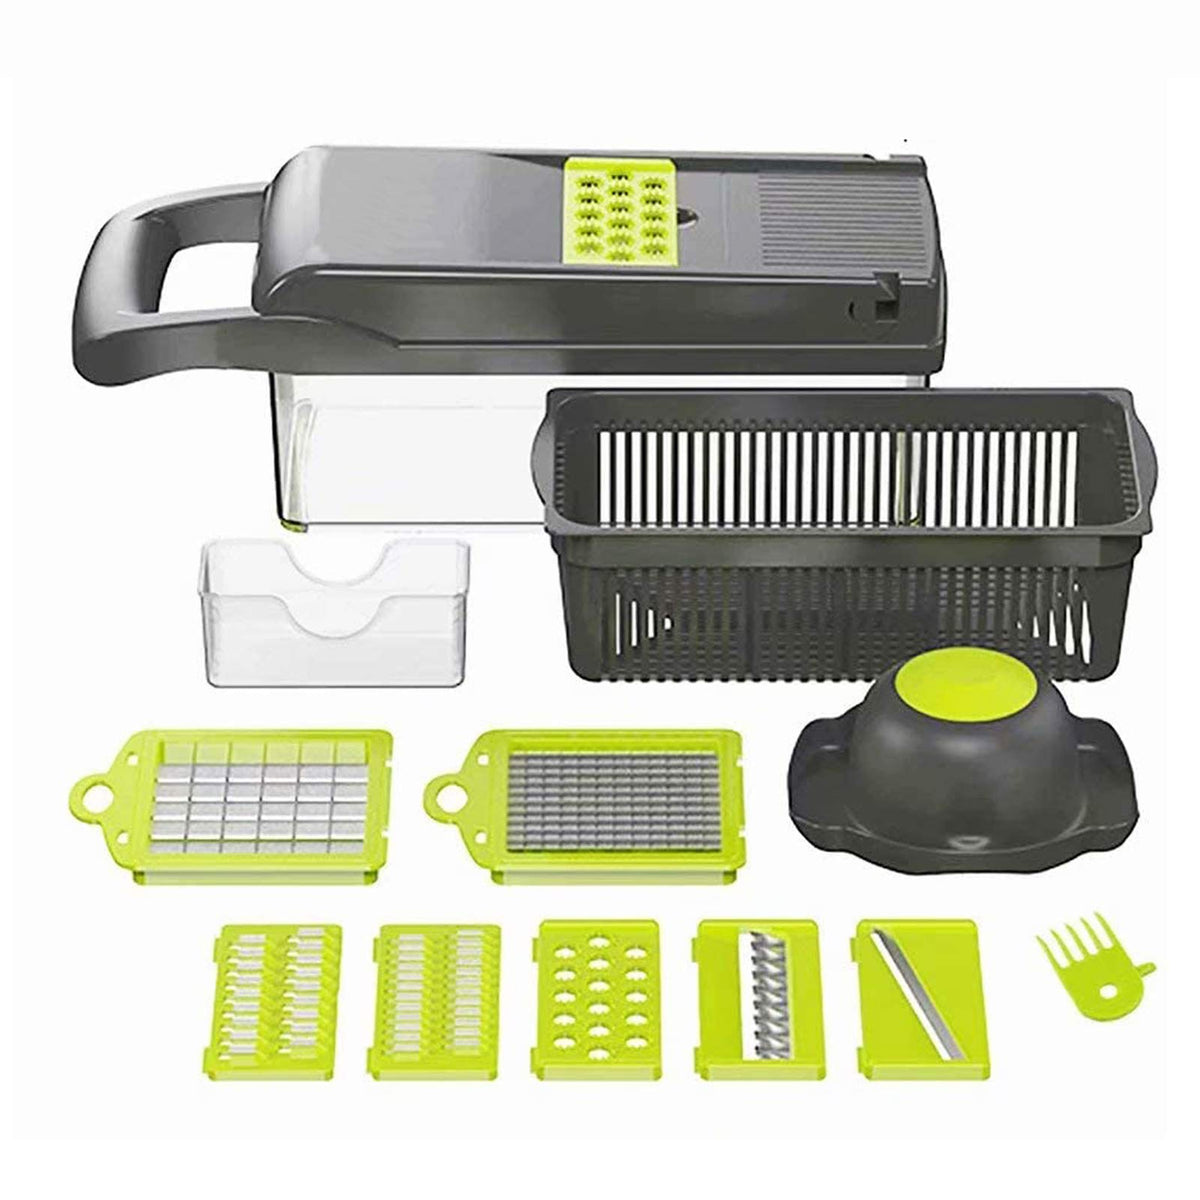 Vegetable Chopper - Multi functional 12-in-1 Food Choppers Onion Chopper  Vegetable Slicer Cutter with Multi-Blades,Colander Basket,Container for